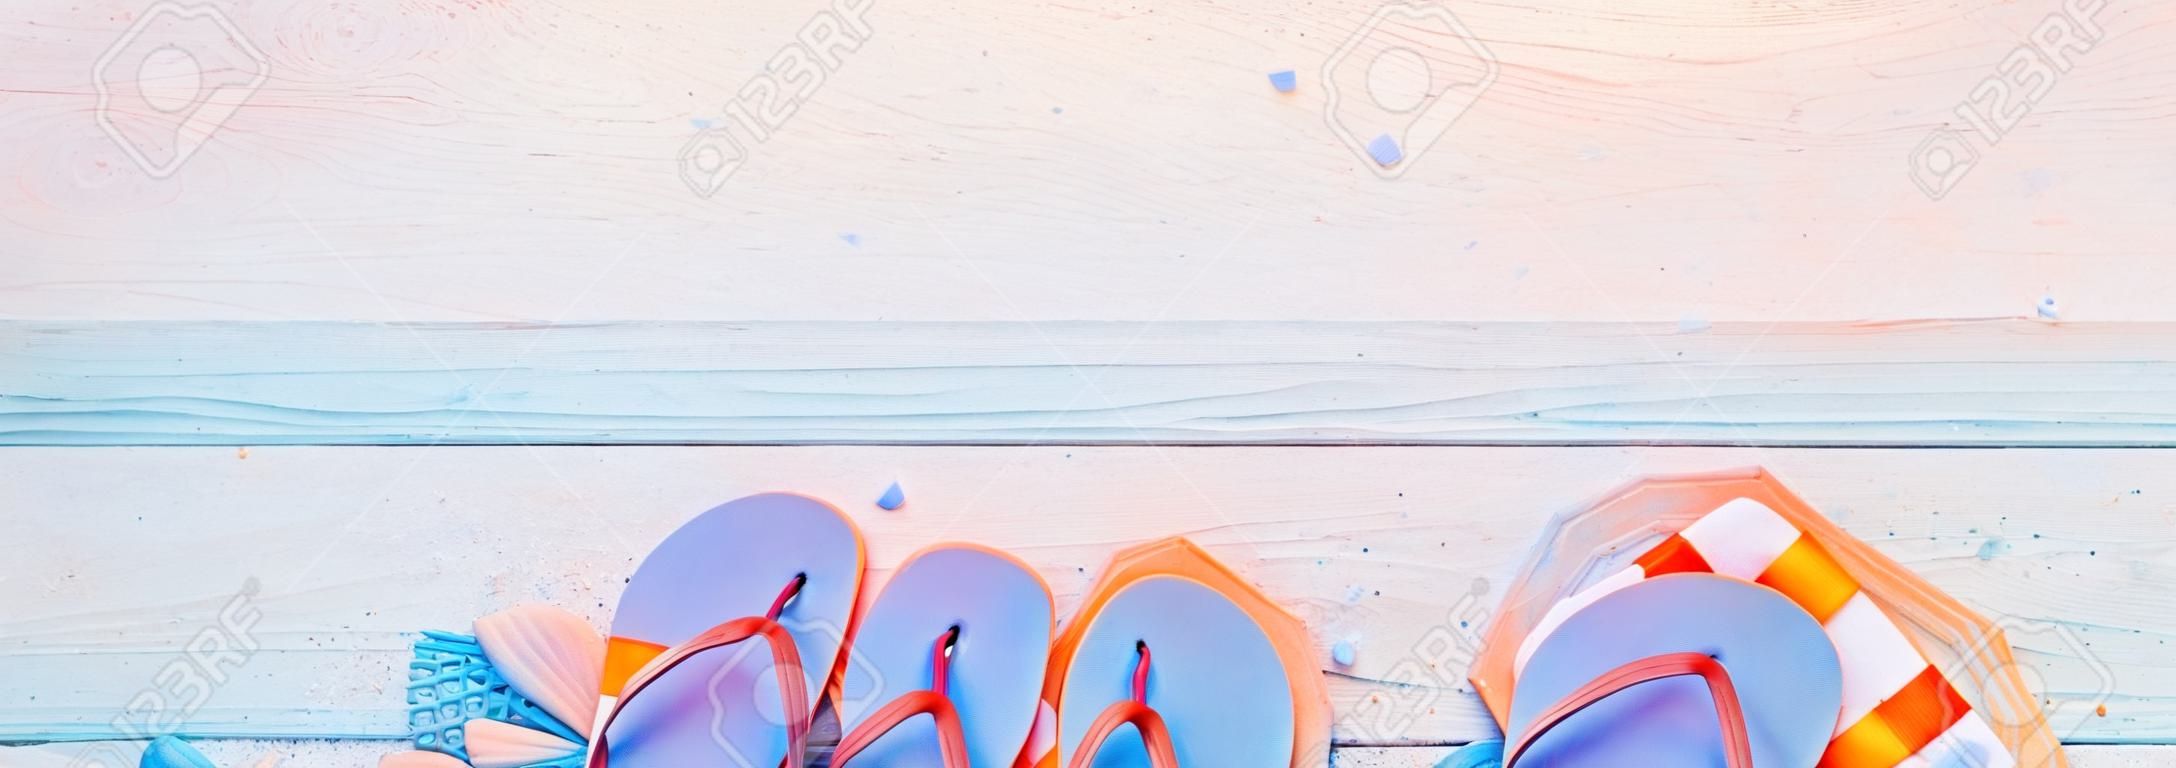 Summer Minimal Design With Beach Accessories - Teal And Orange Colors Gradient